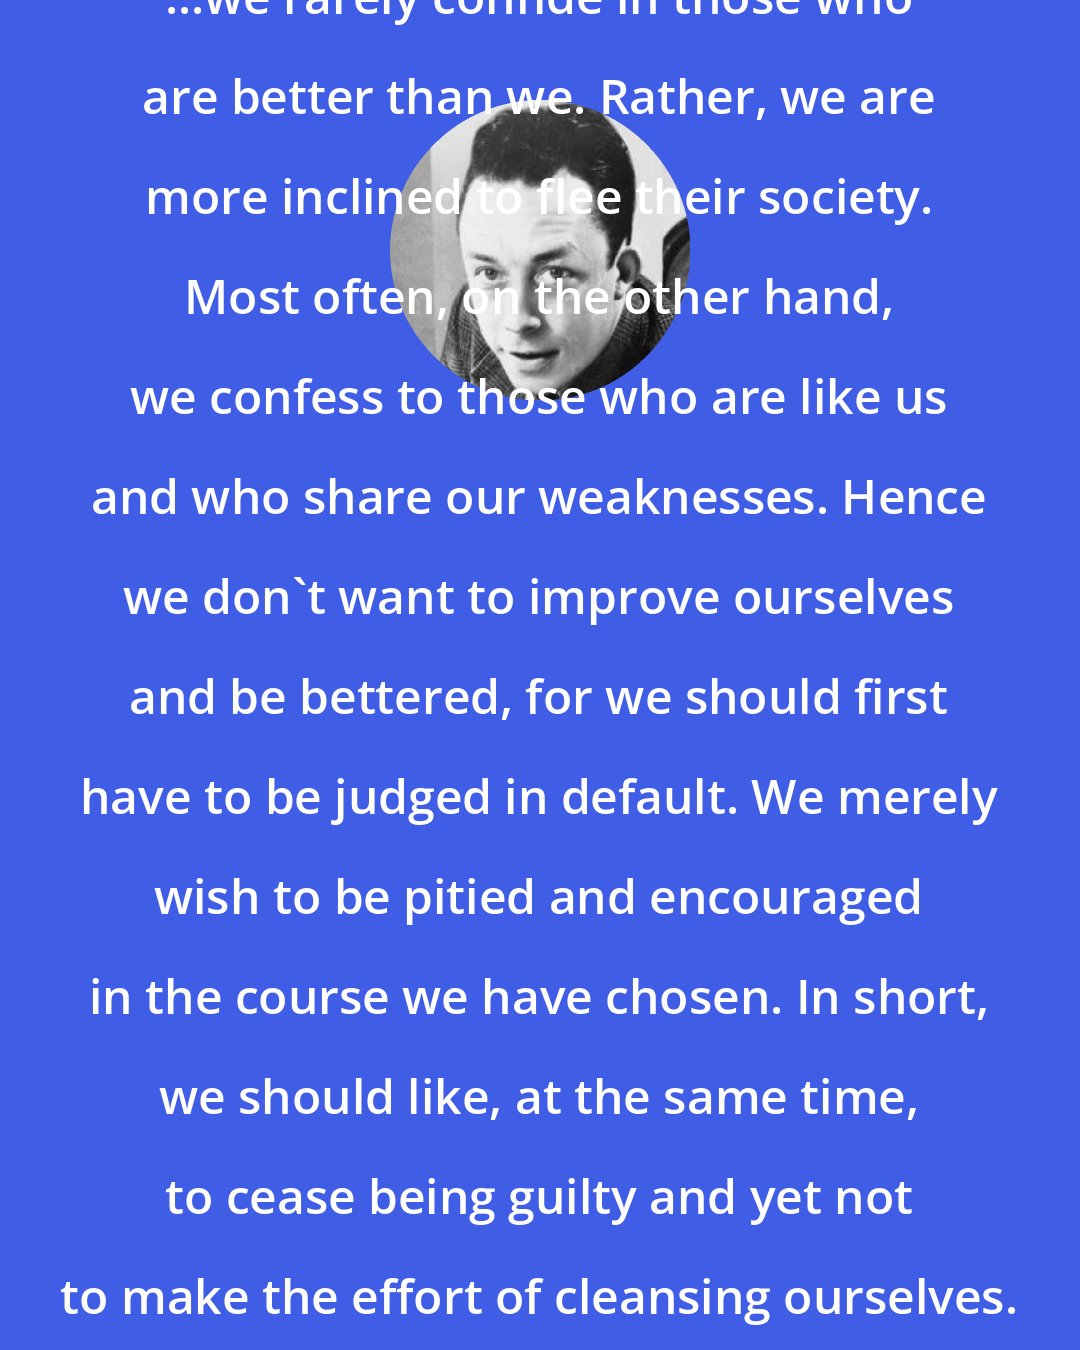 Albert Camus: ...we rarely confide in those who are better than we. Rather, we are more inclined to flee their society. Most often, on the other hand, we confess to those who are like us and who share our weaknesses. Hence we don't want to improve ourselves and be bettered, for we should first have to be judged in default. We merely wish to be pitied and encouraged in the course we have chosen. In short, we should like, at the same time, to cease being guilty and yet not to make the effort of cleansing ourselves.